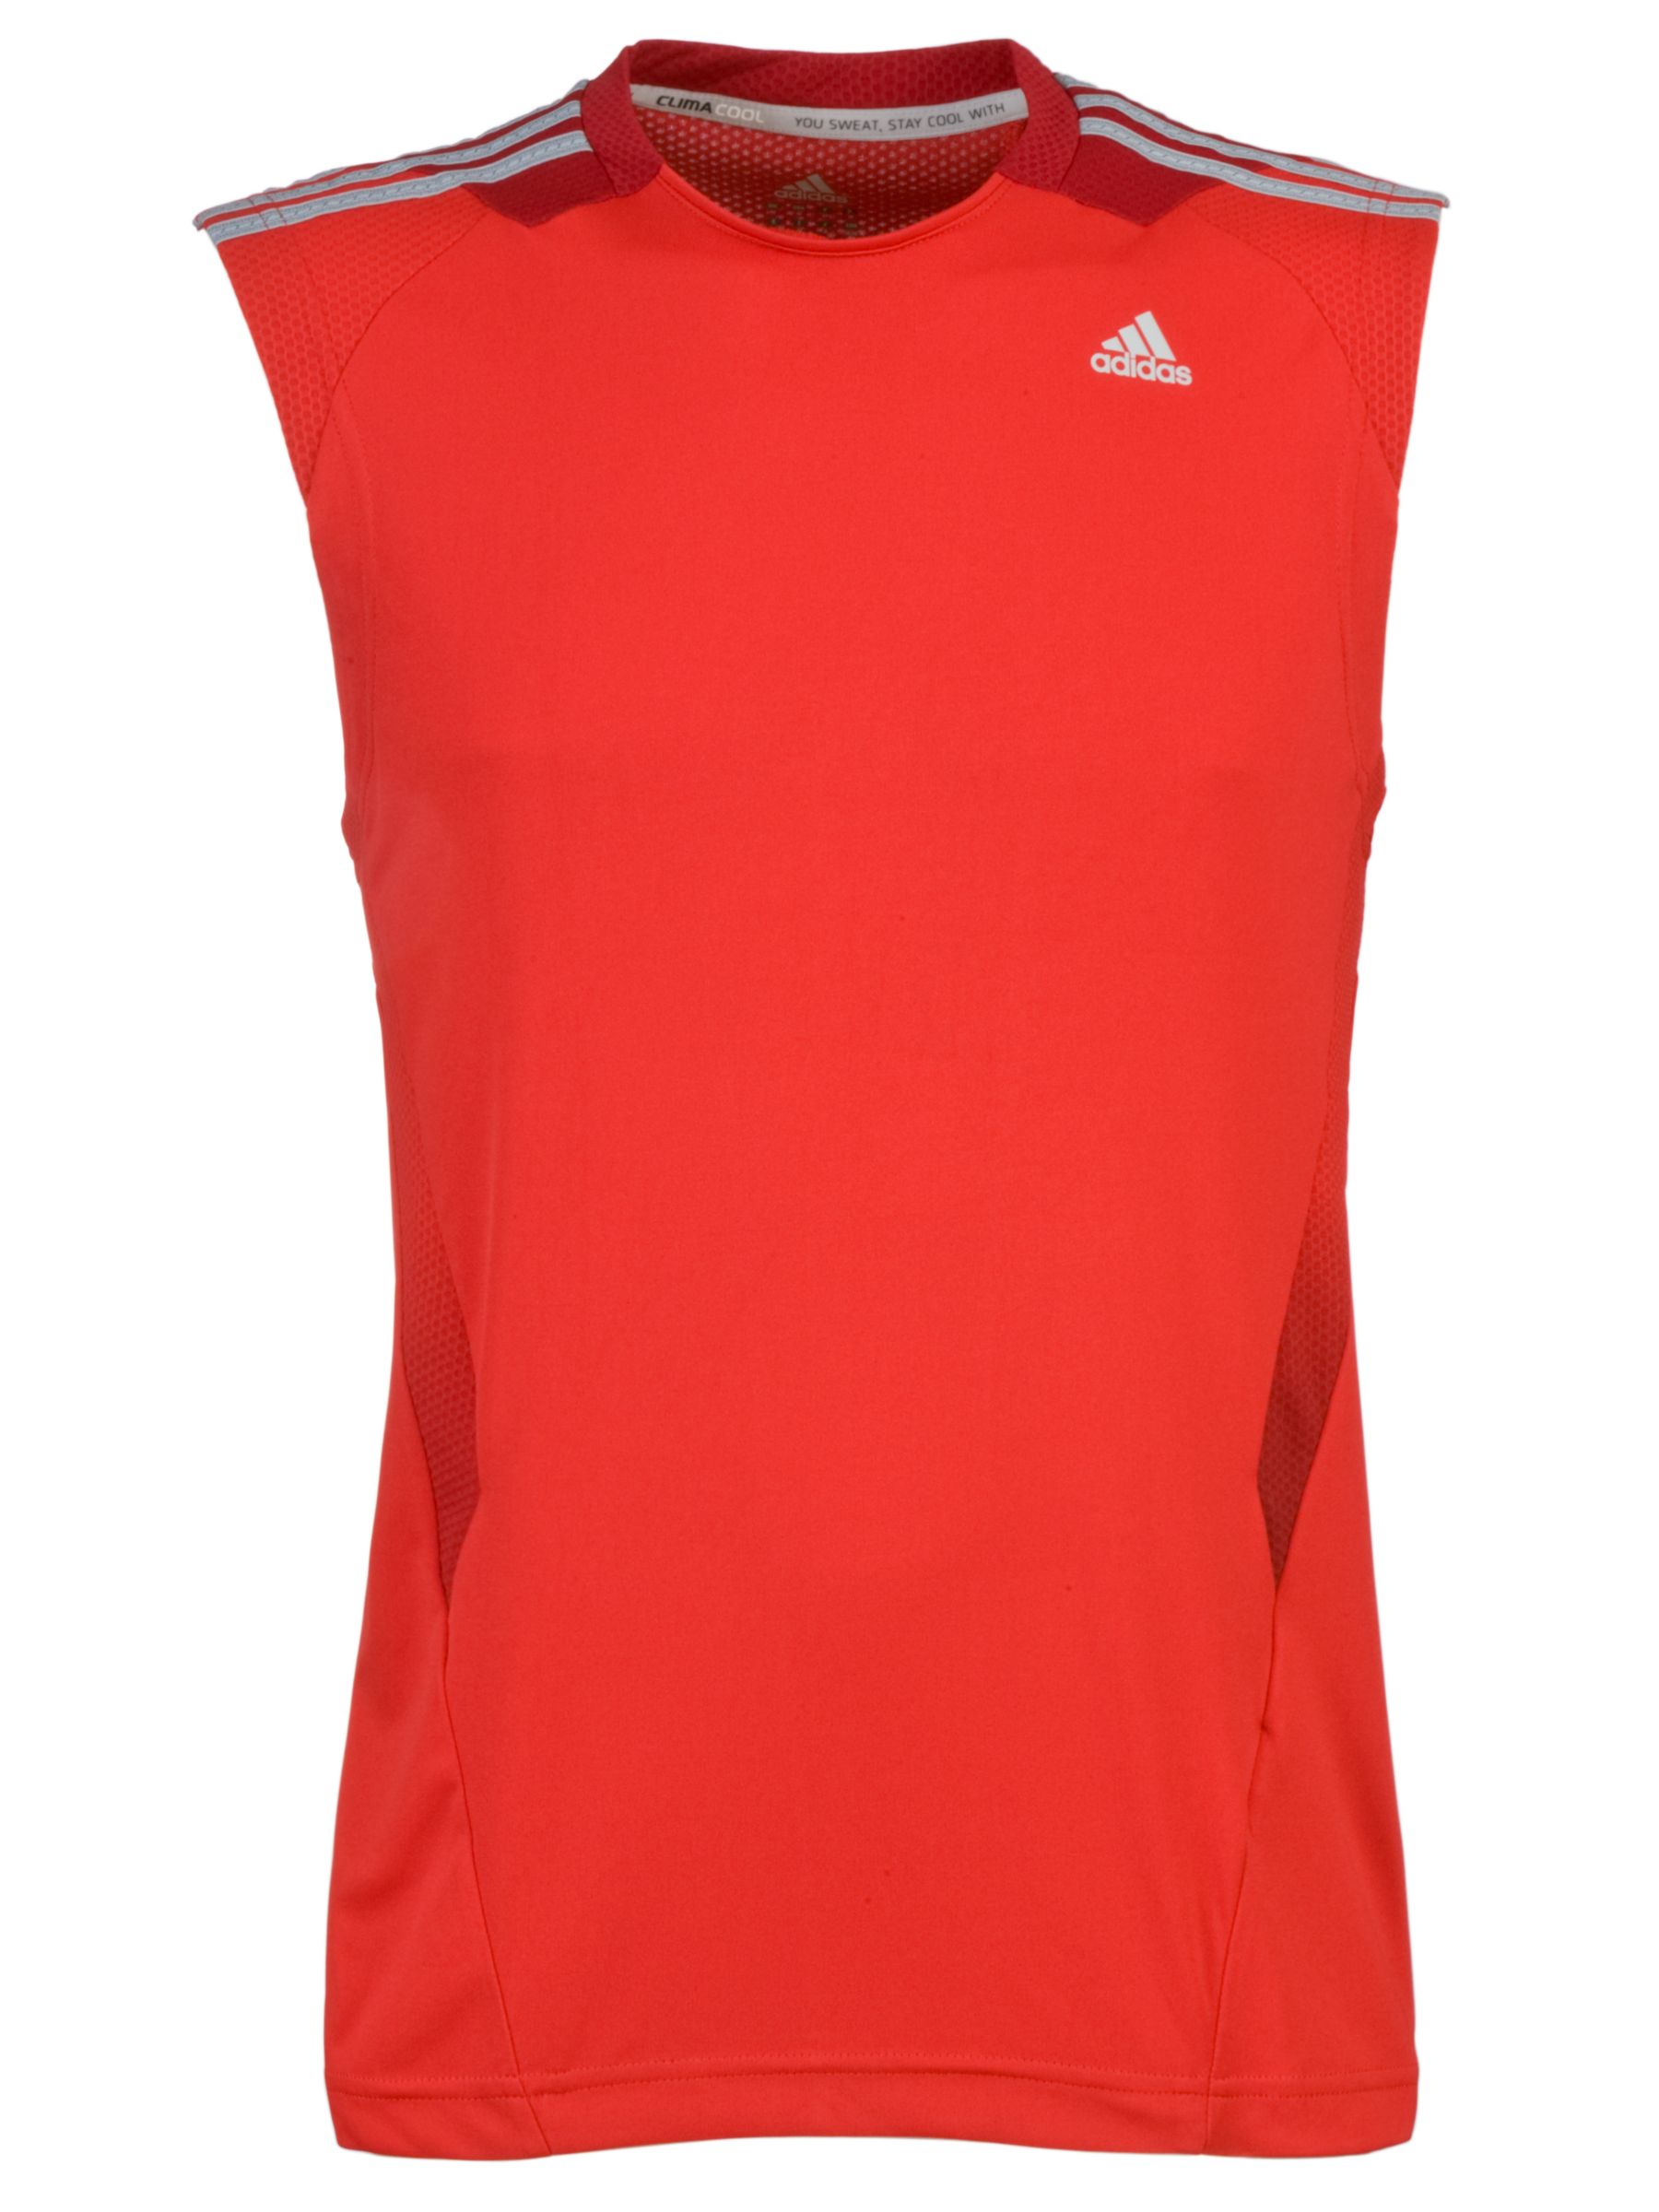 Clima365 Sleeveless T-Shirt, Red/Strong red